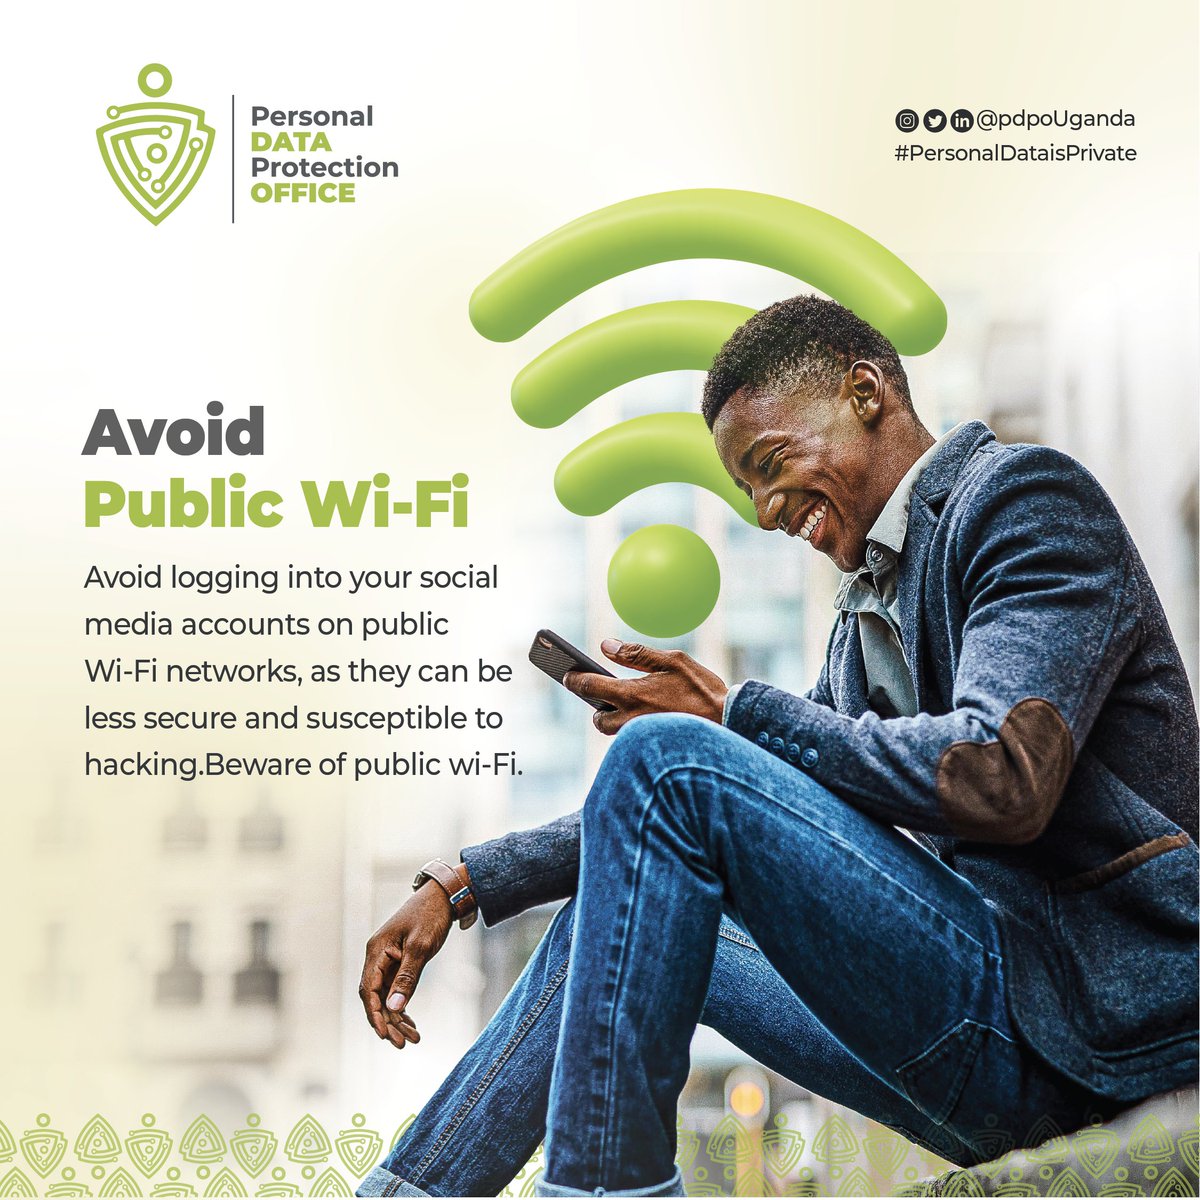 Did you know? Public Wi-Fi networks are often less secure than private ones, making it easier for hackers to intercept data transmitted over them. When you log in to your accounts on public Wi-Fi, you risk exposing sensitive information like passwords and personal details. Avoid…